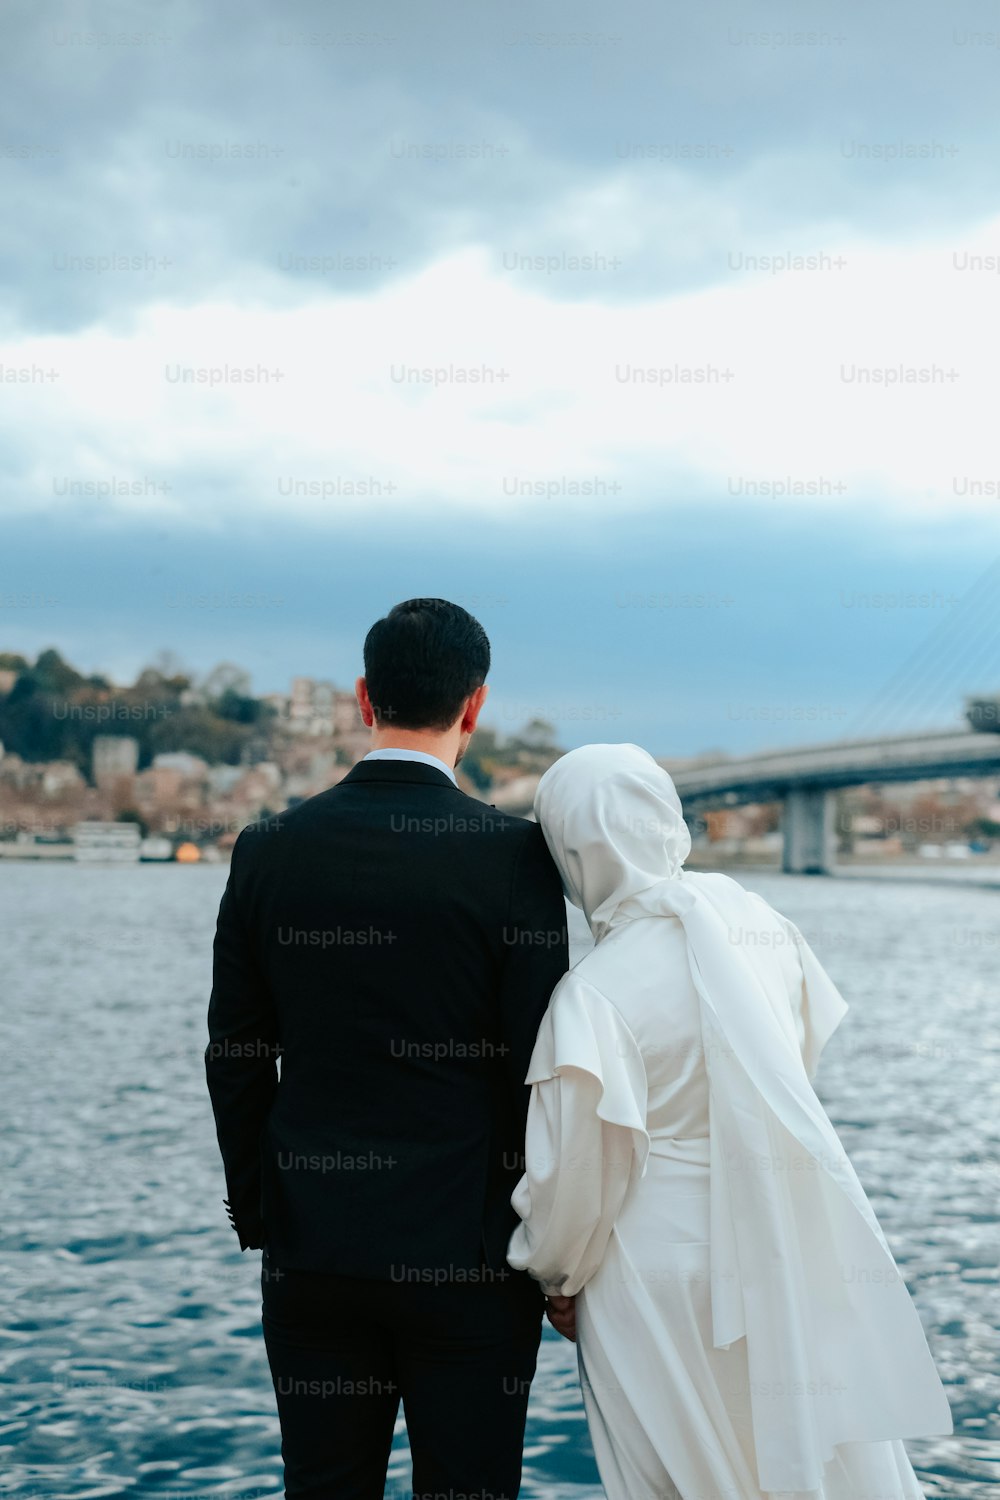 a man and a woman standing next to each other near a body of water